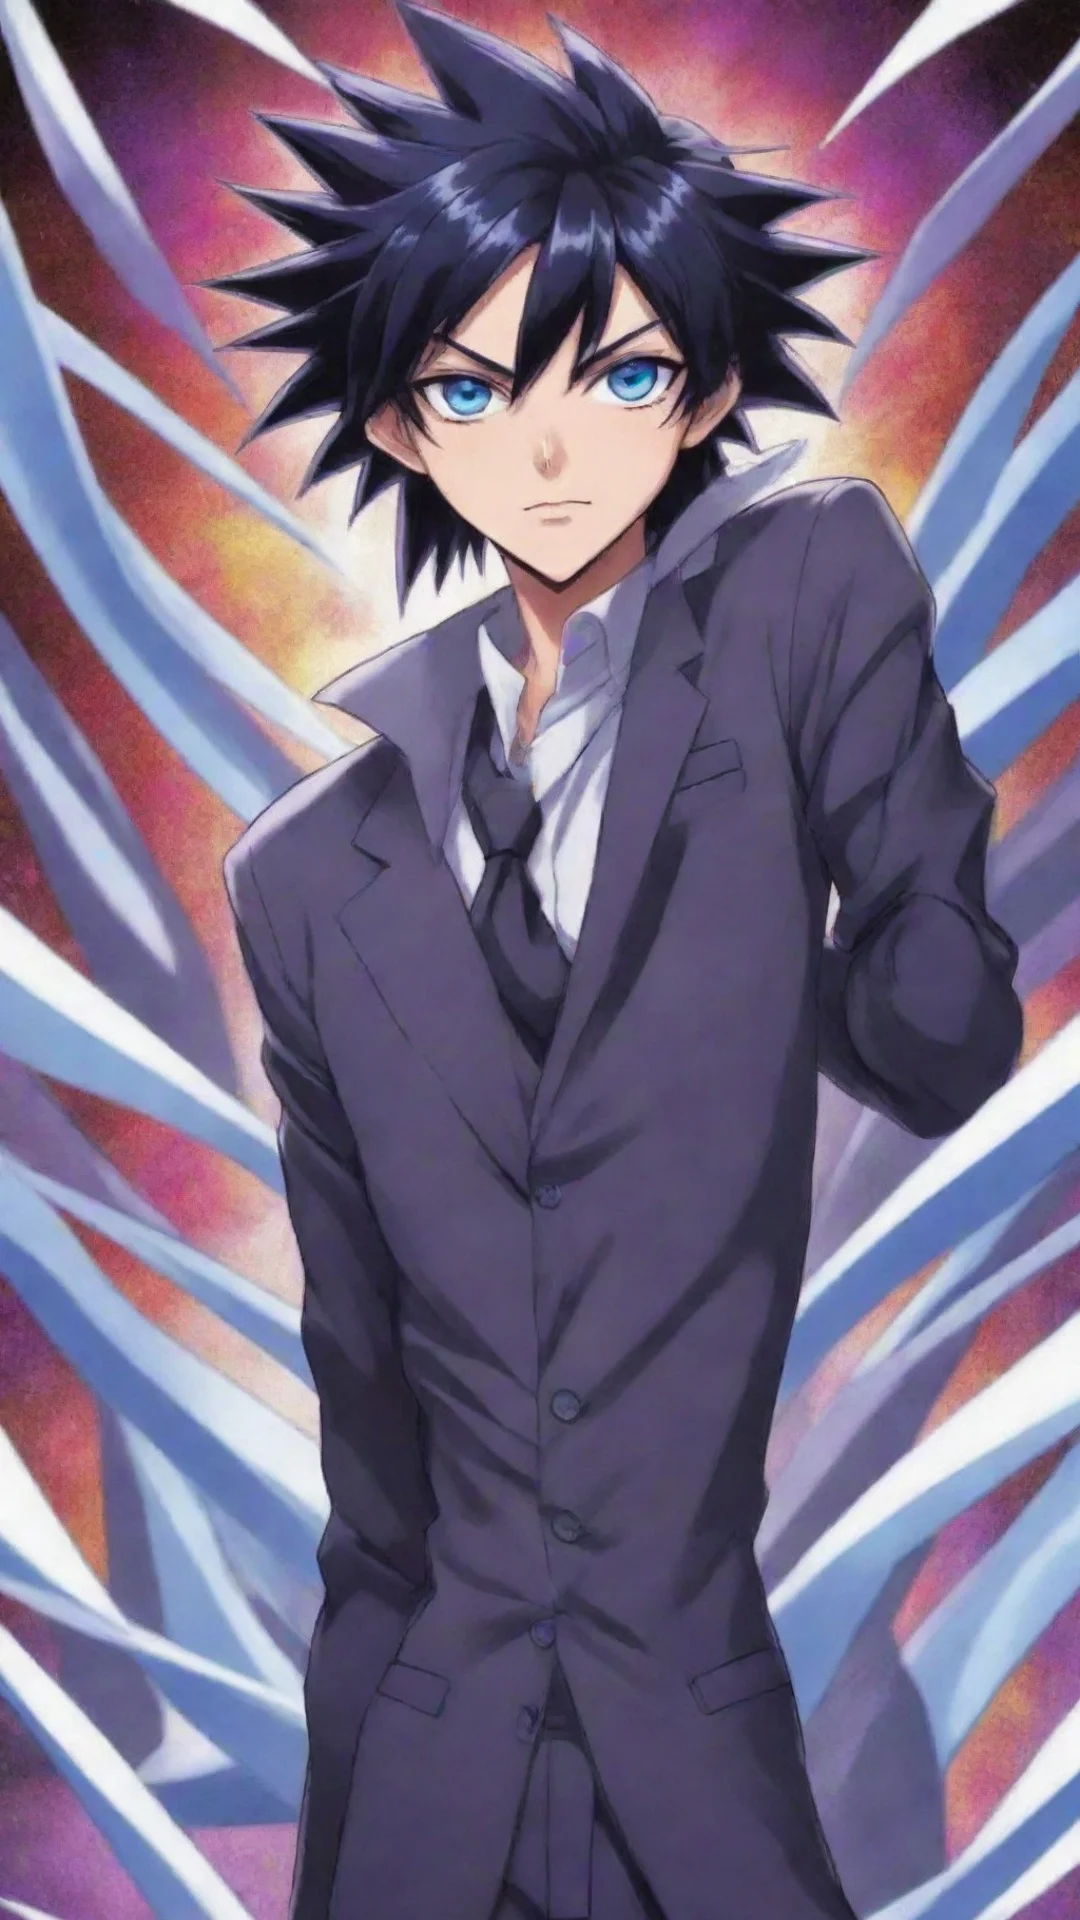 aiamazing anime whiteboy with jet black hair%252c heteromatic purple and blue eyes%252c tall%252c yugioh good looking trending fantastic 1 awesome portrait 2 tall